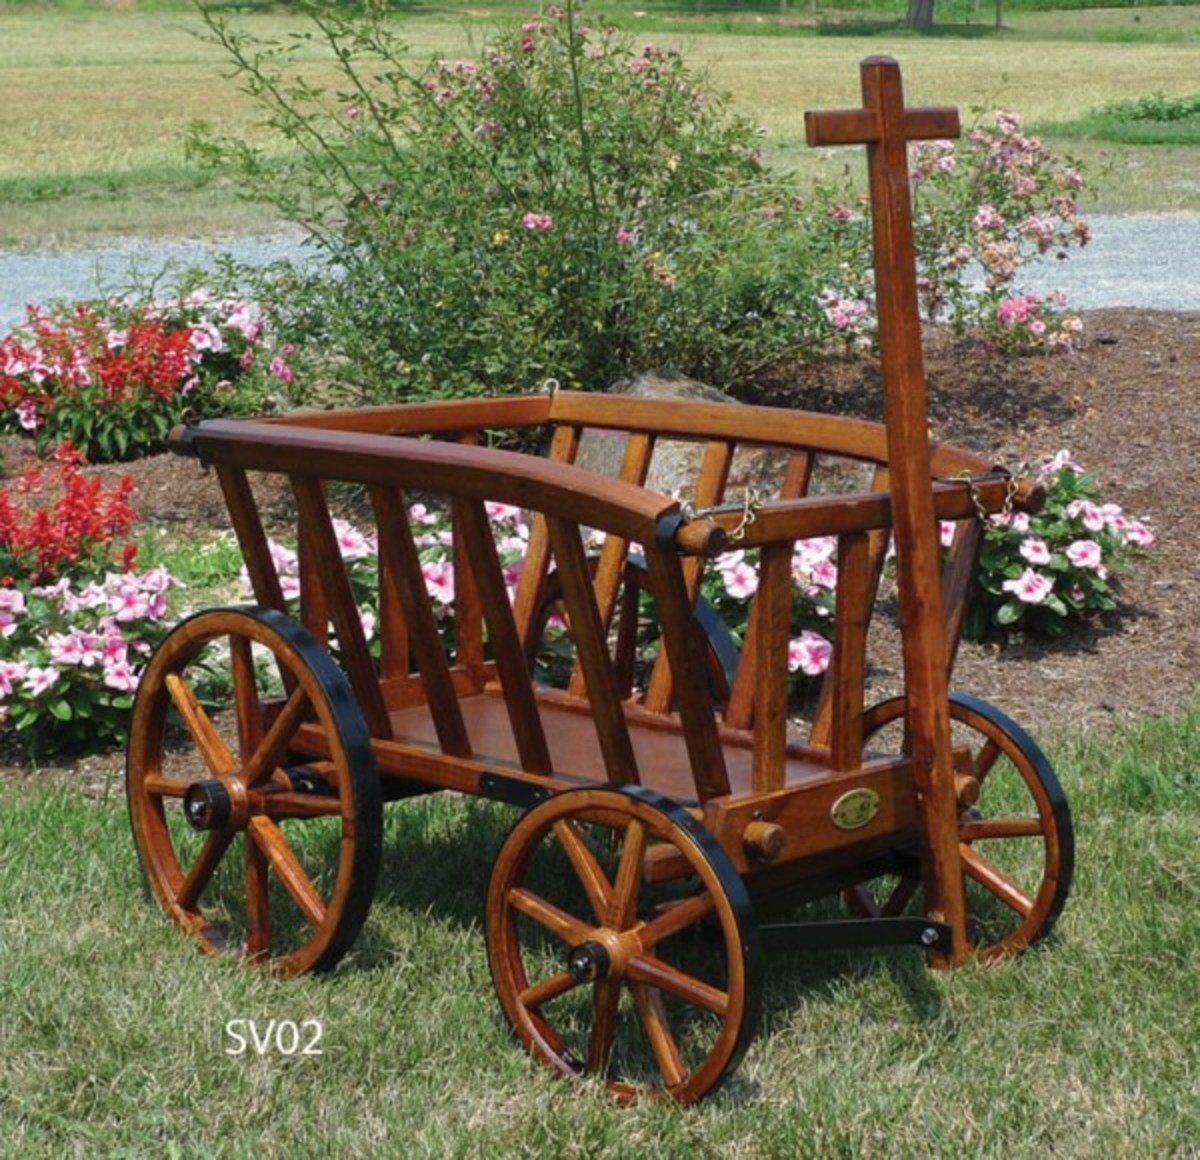 Reproduction Goat Wagons